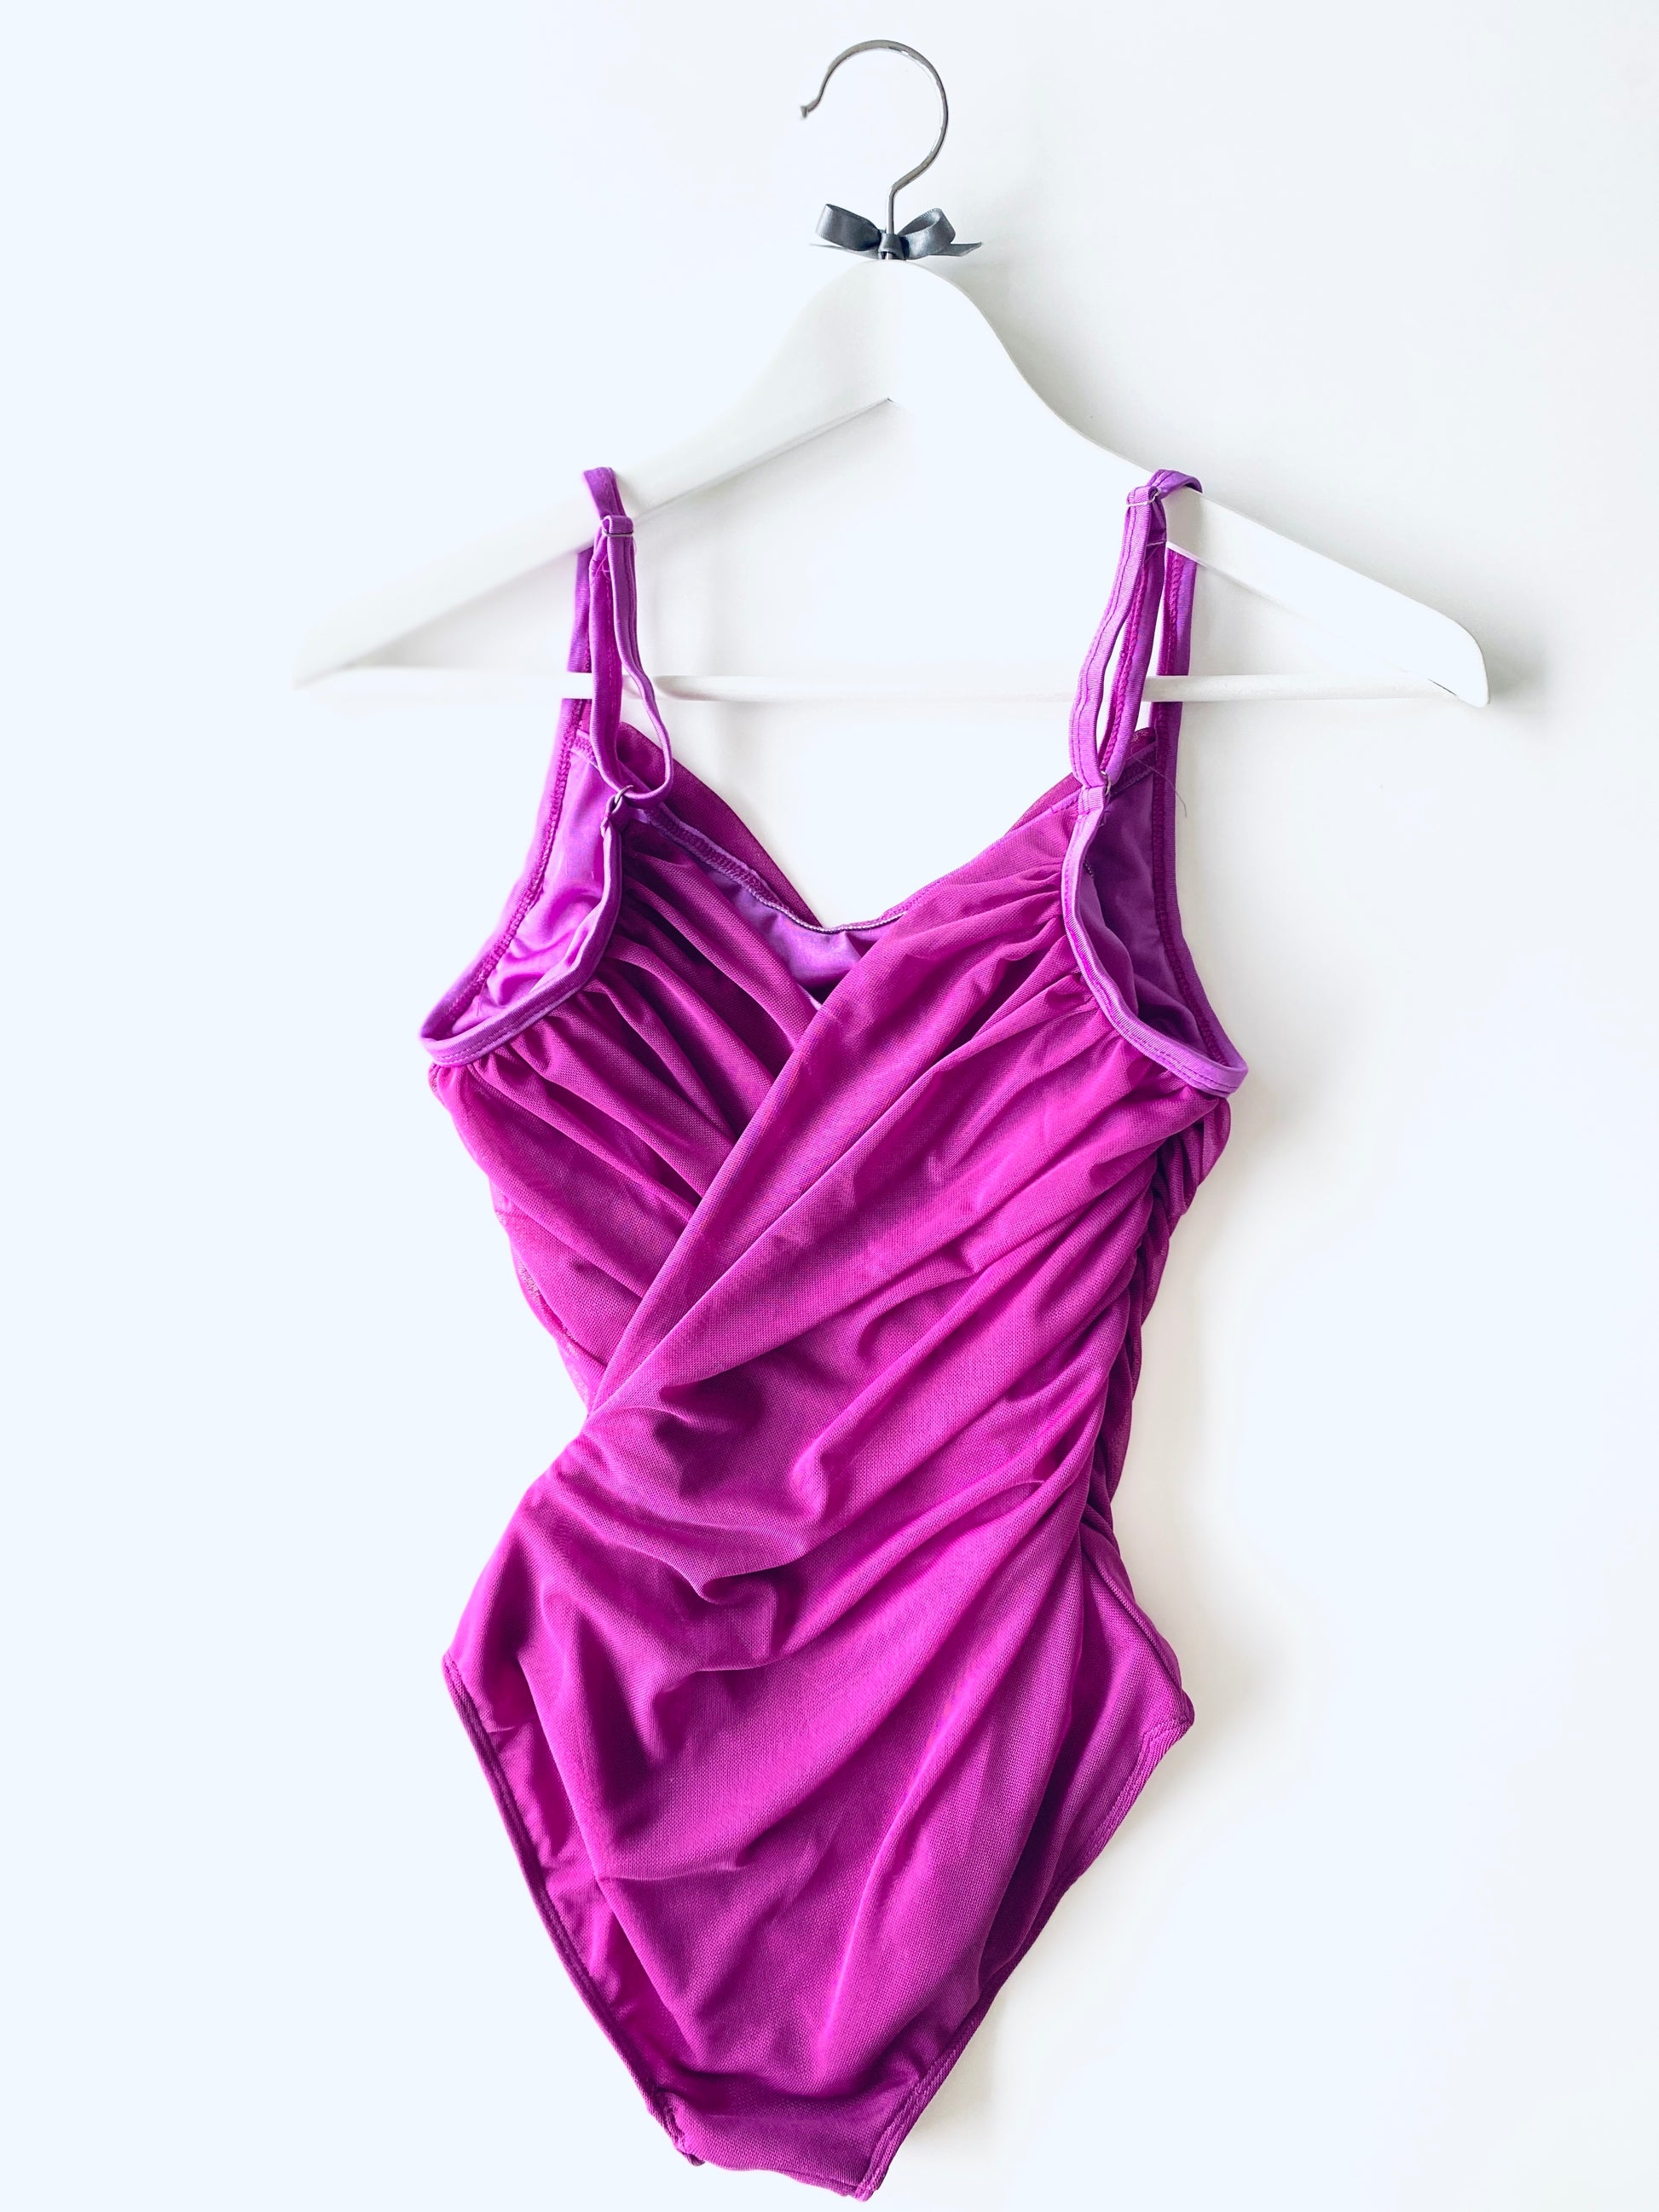 Ruched camisole ballet leotard with draped mesh in magenta from The Collective Dancewear